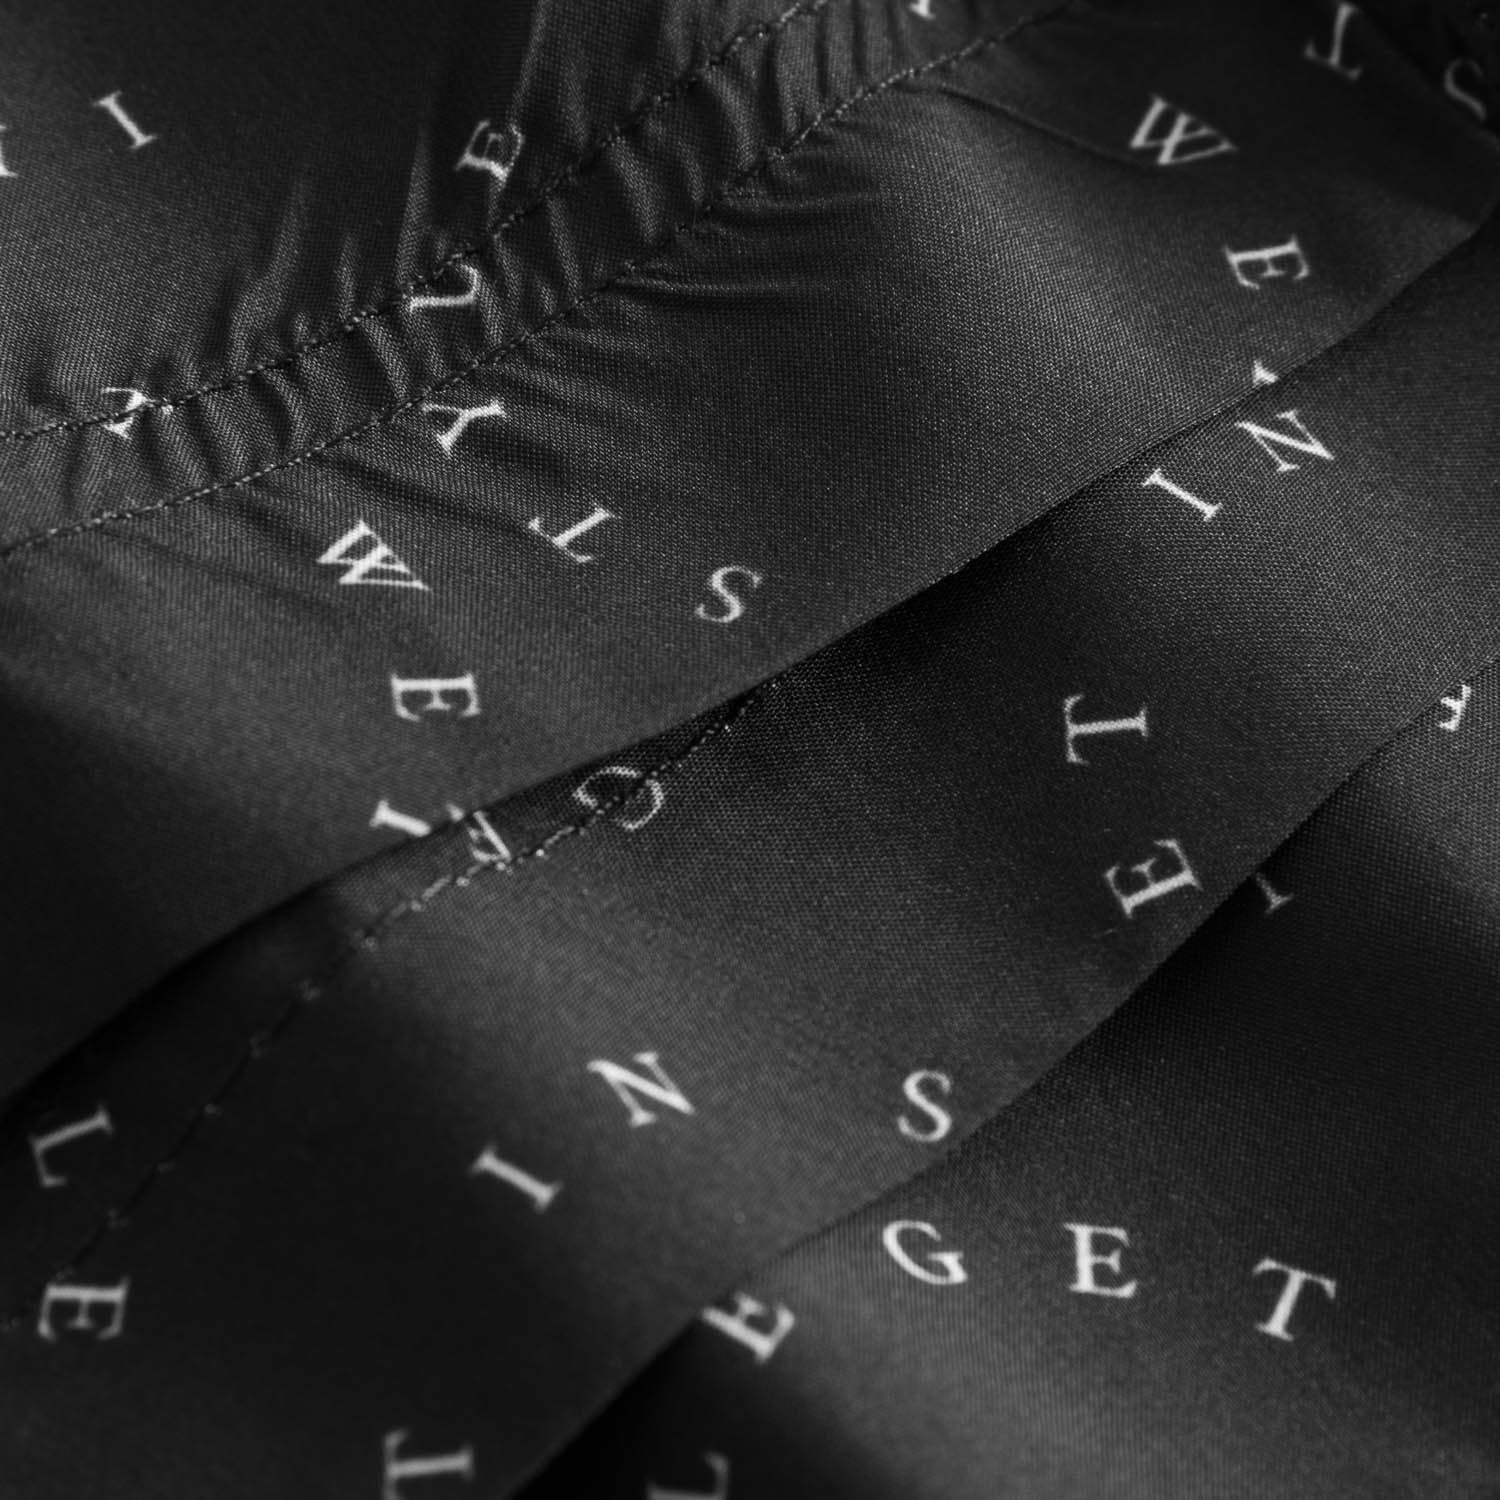 Close up on black swim trunks with white text